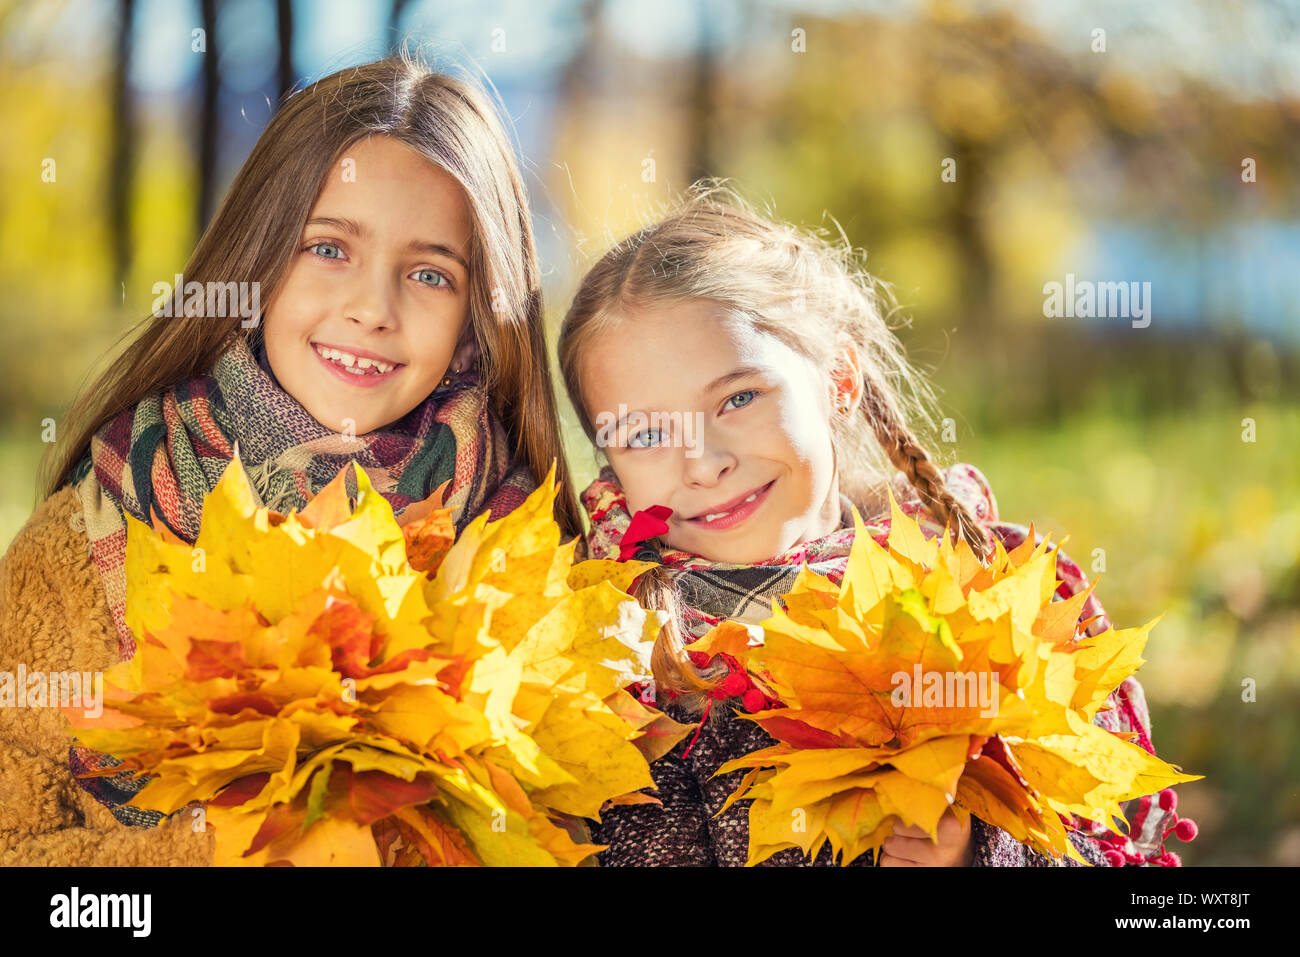 Two cute smiling 8 years old girls posing together in a park on a sunny autumn day. Stock Photo